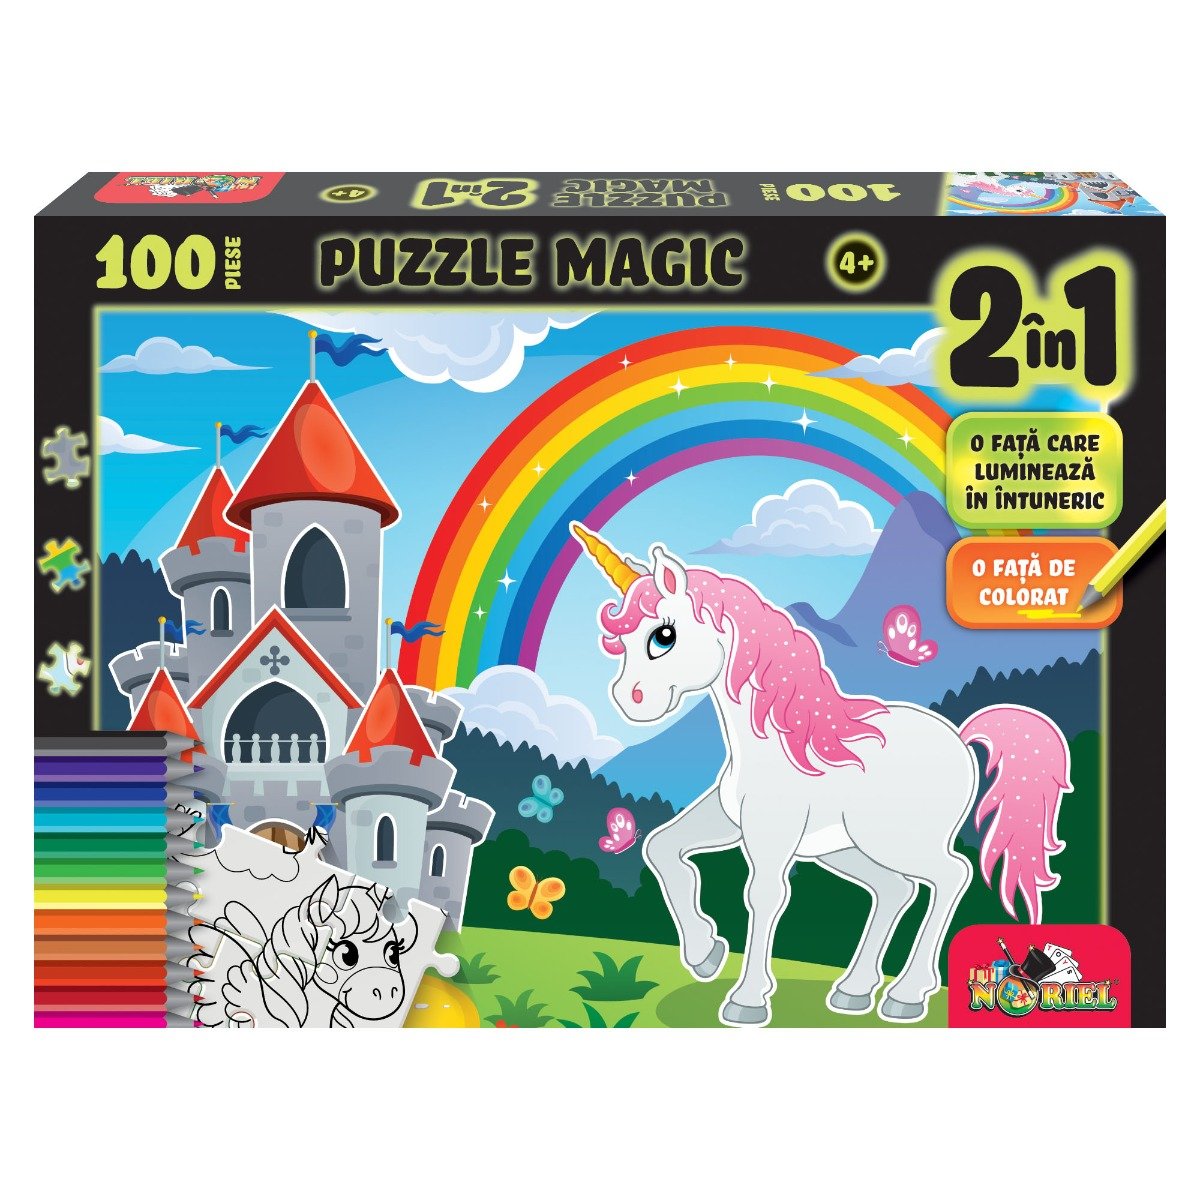 Puzzle Magic 2 in 1, Witty Puzzlezz, Unicorn, 100 piese Puzzle 2023-09-21 3